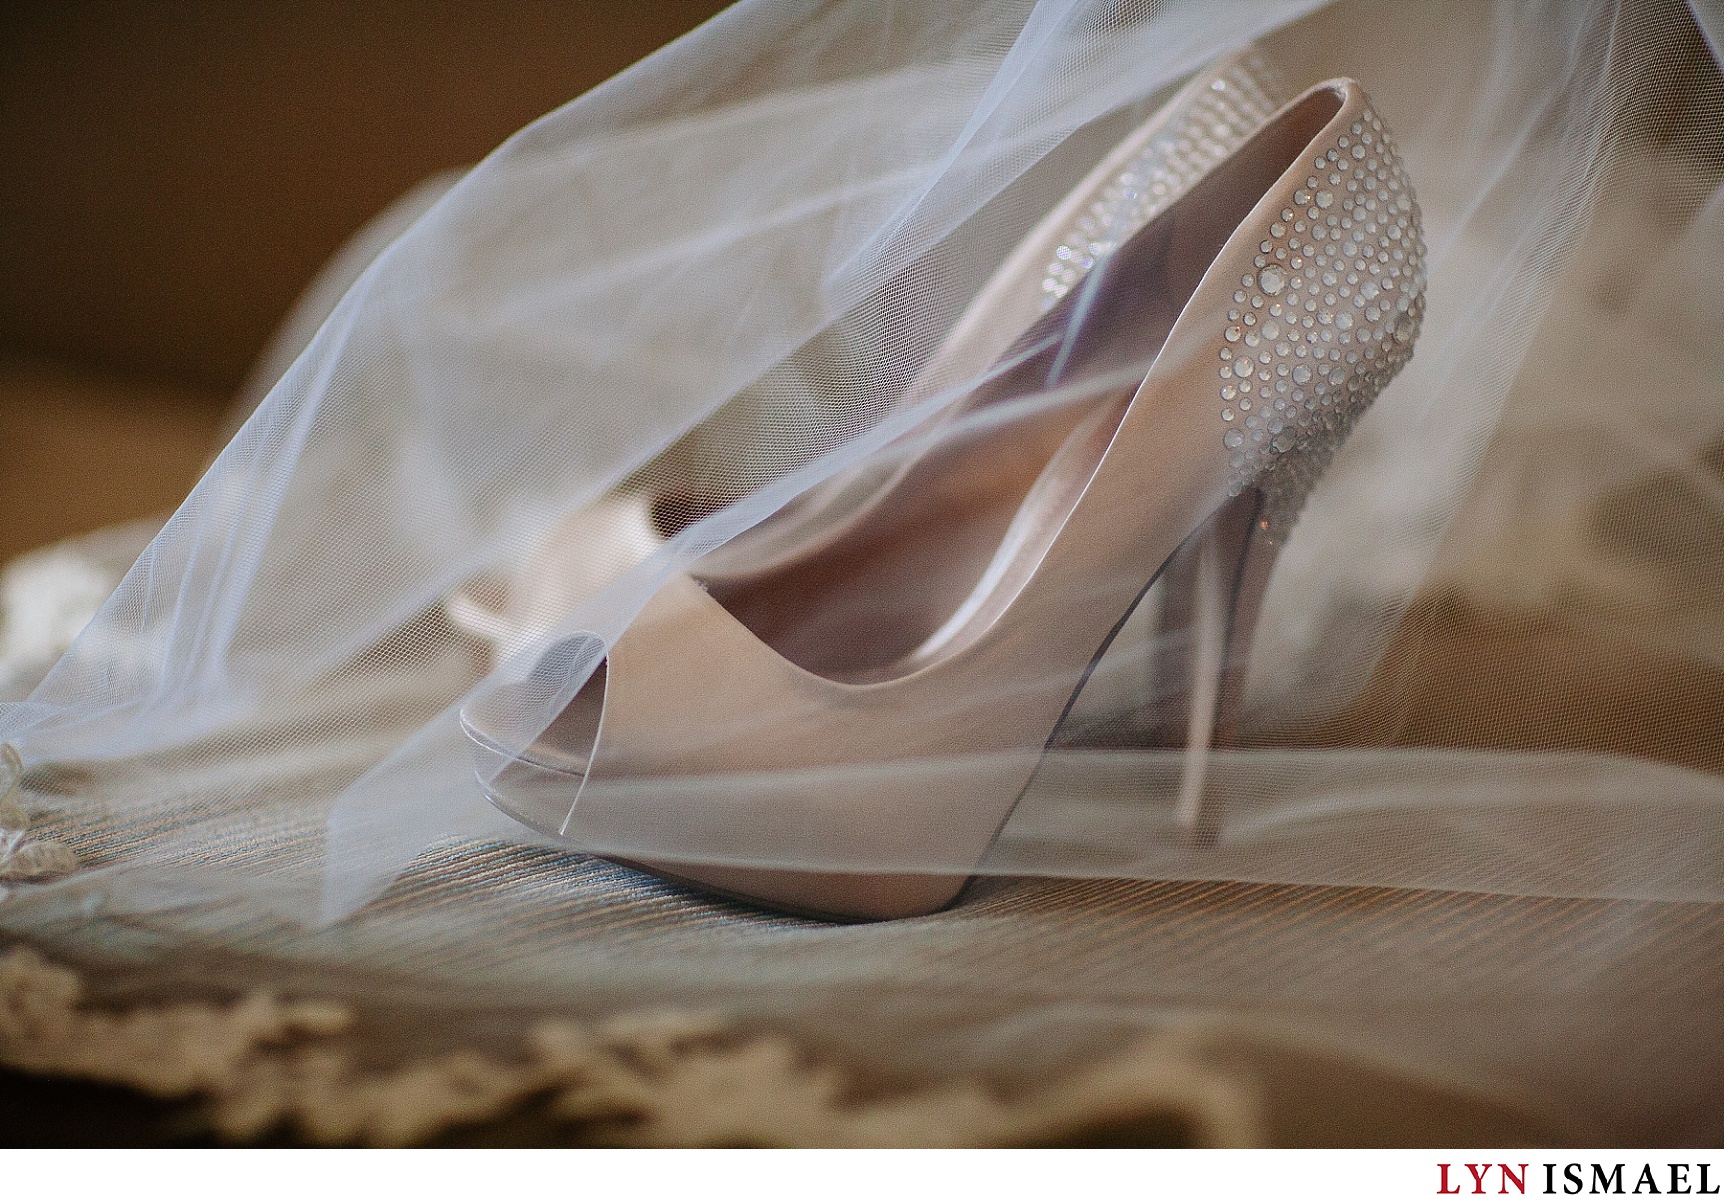 shoes of the bride covered by her veil.